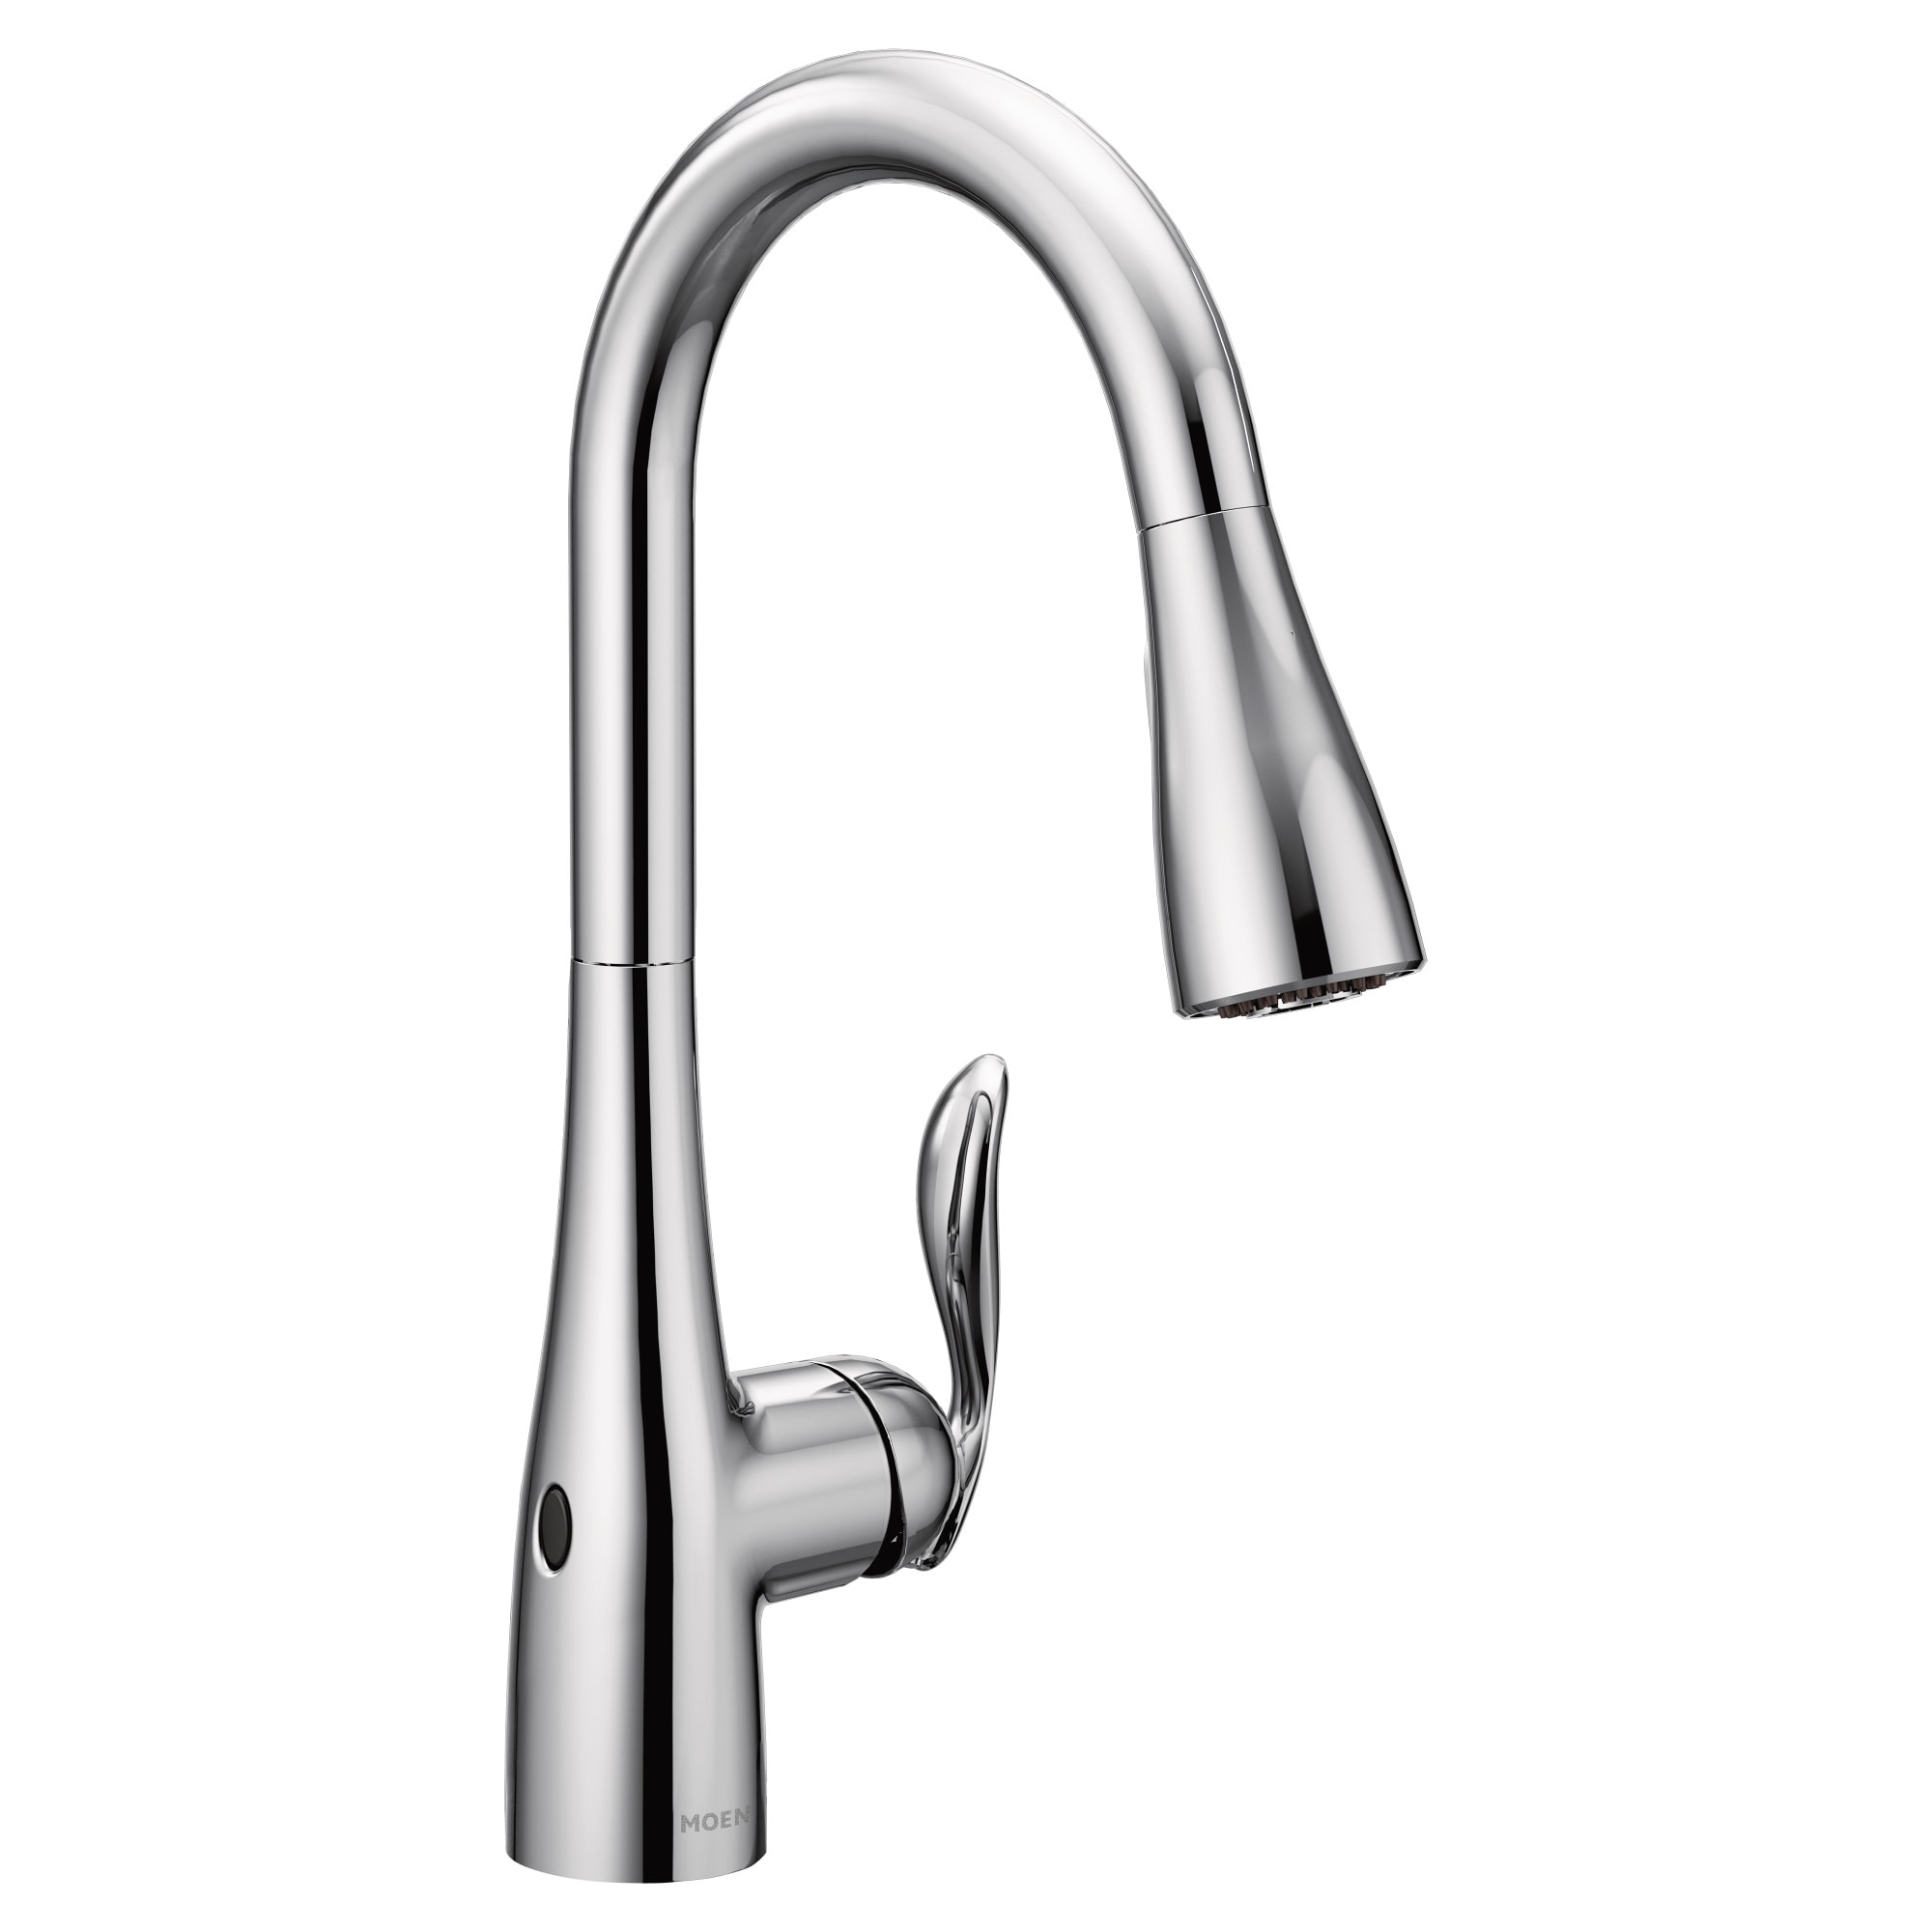 Moen 7594ew Arbor Pull Down High Arc Kitchen Faucet With Motionsense